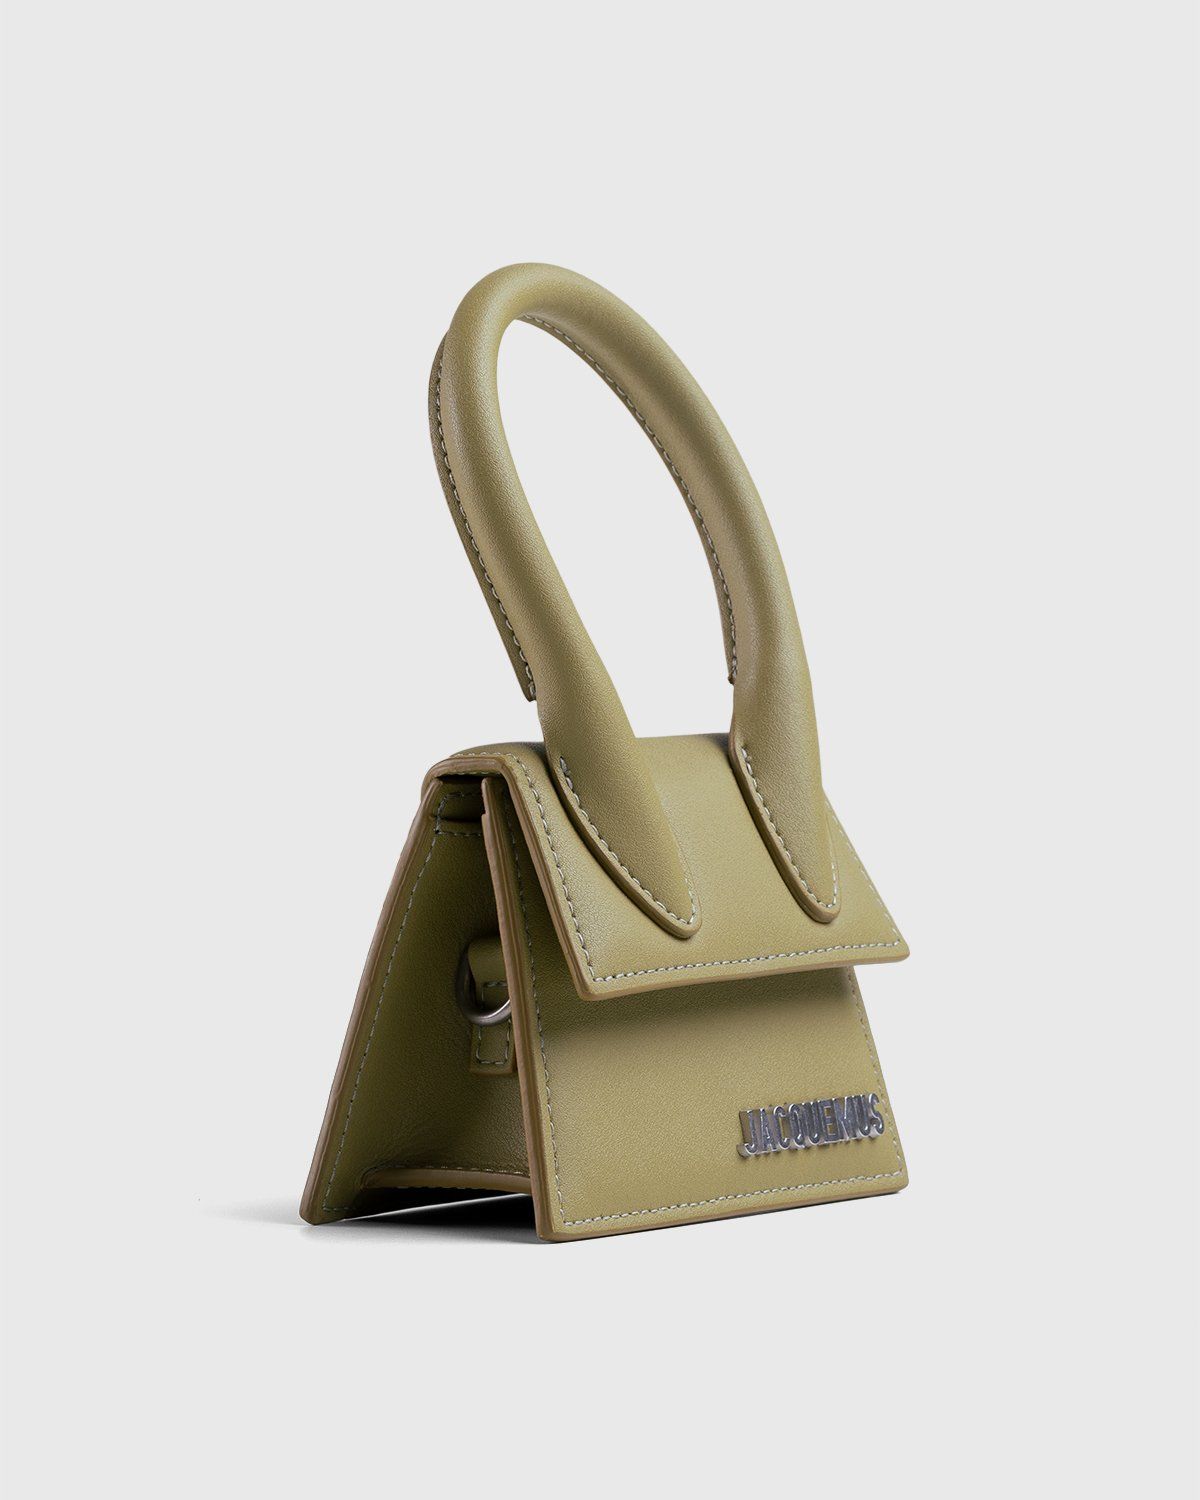 JACQUEMUS Le Chiquito Bag in Light Green